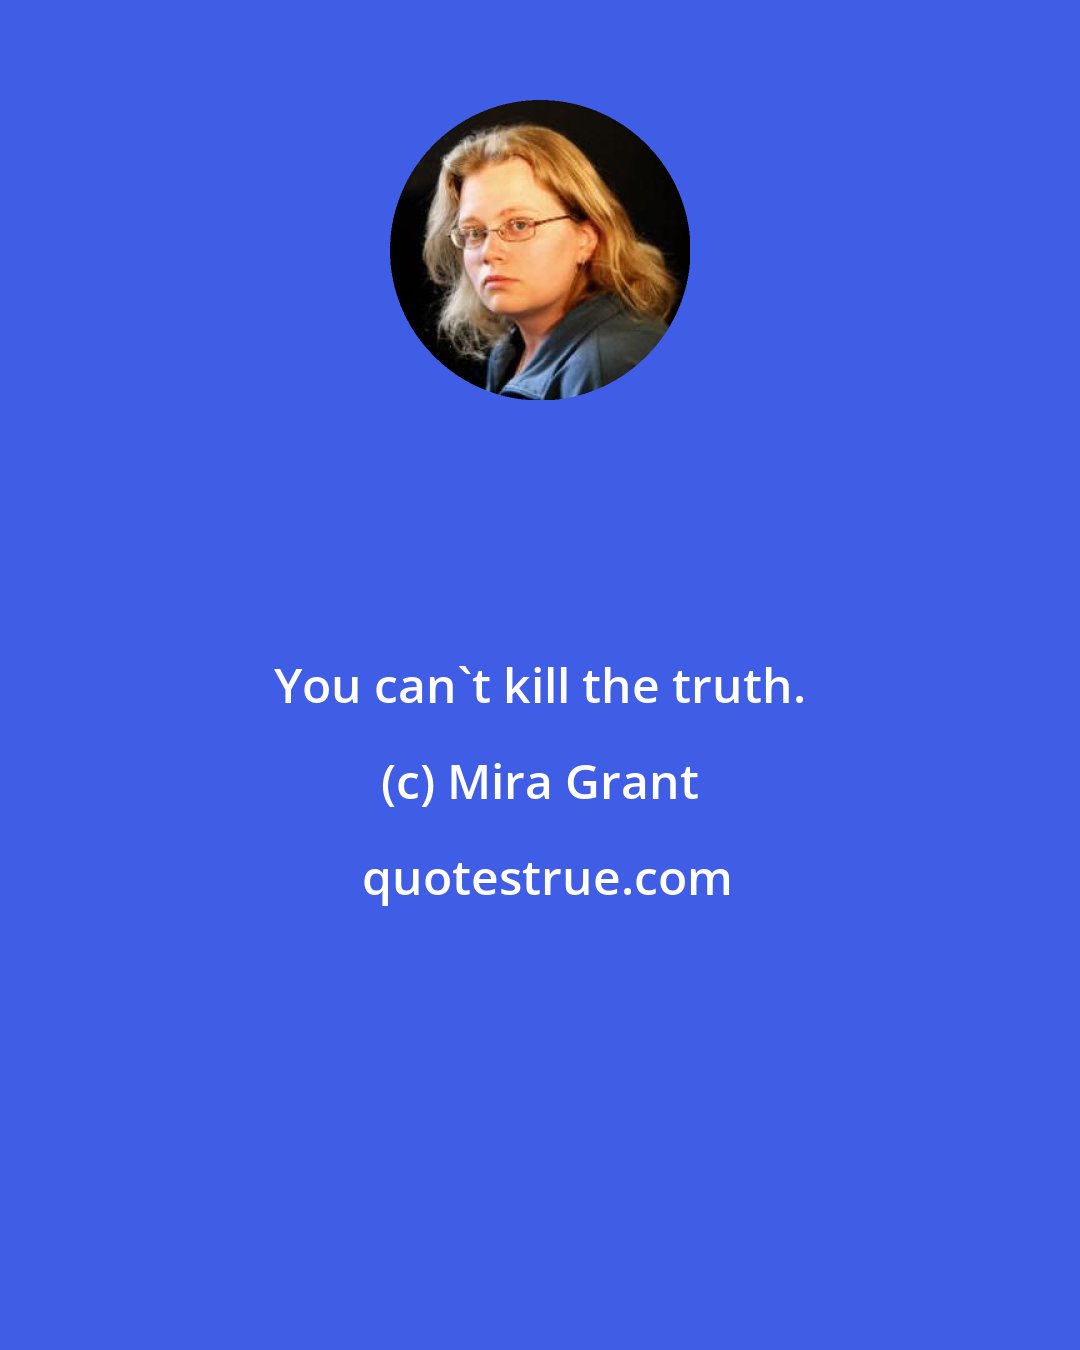 Mira Grant: You can't kill the truth.